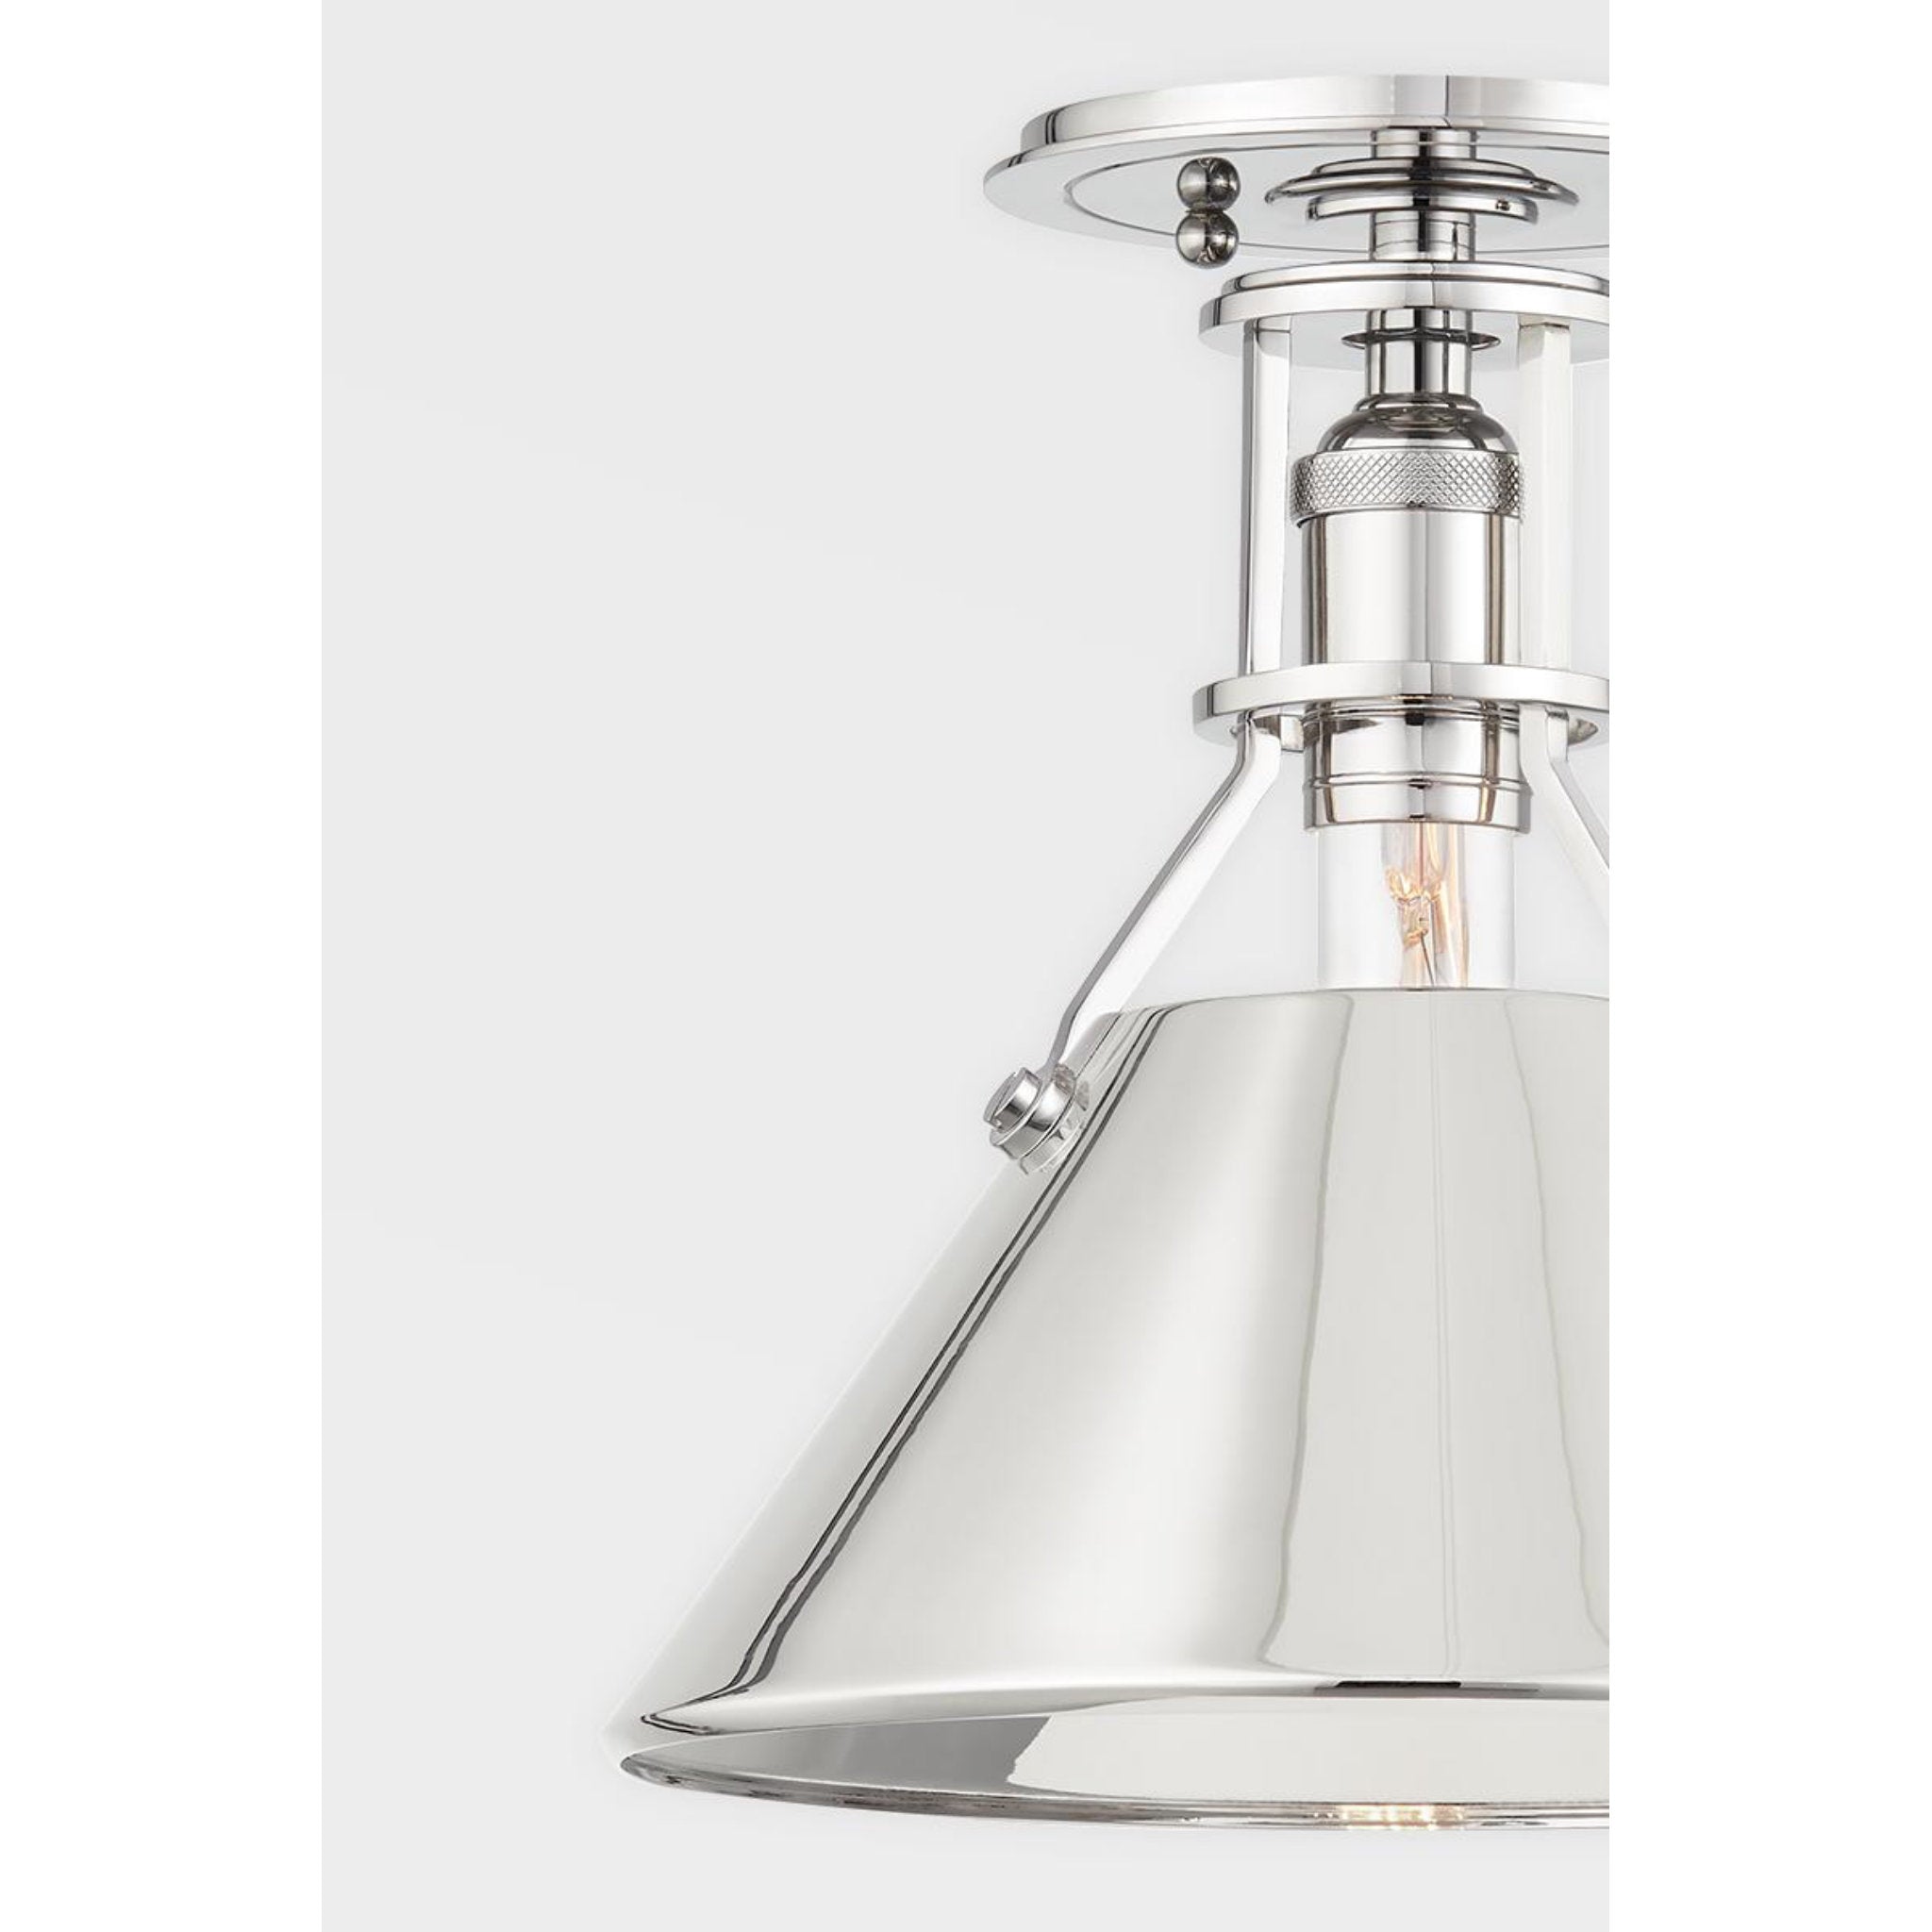 Metal No.2 1 Light Wall Sconce in Polished Nickel by Mark D. Sikes